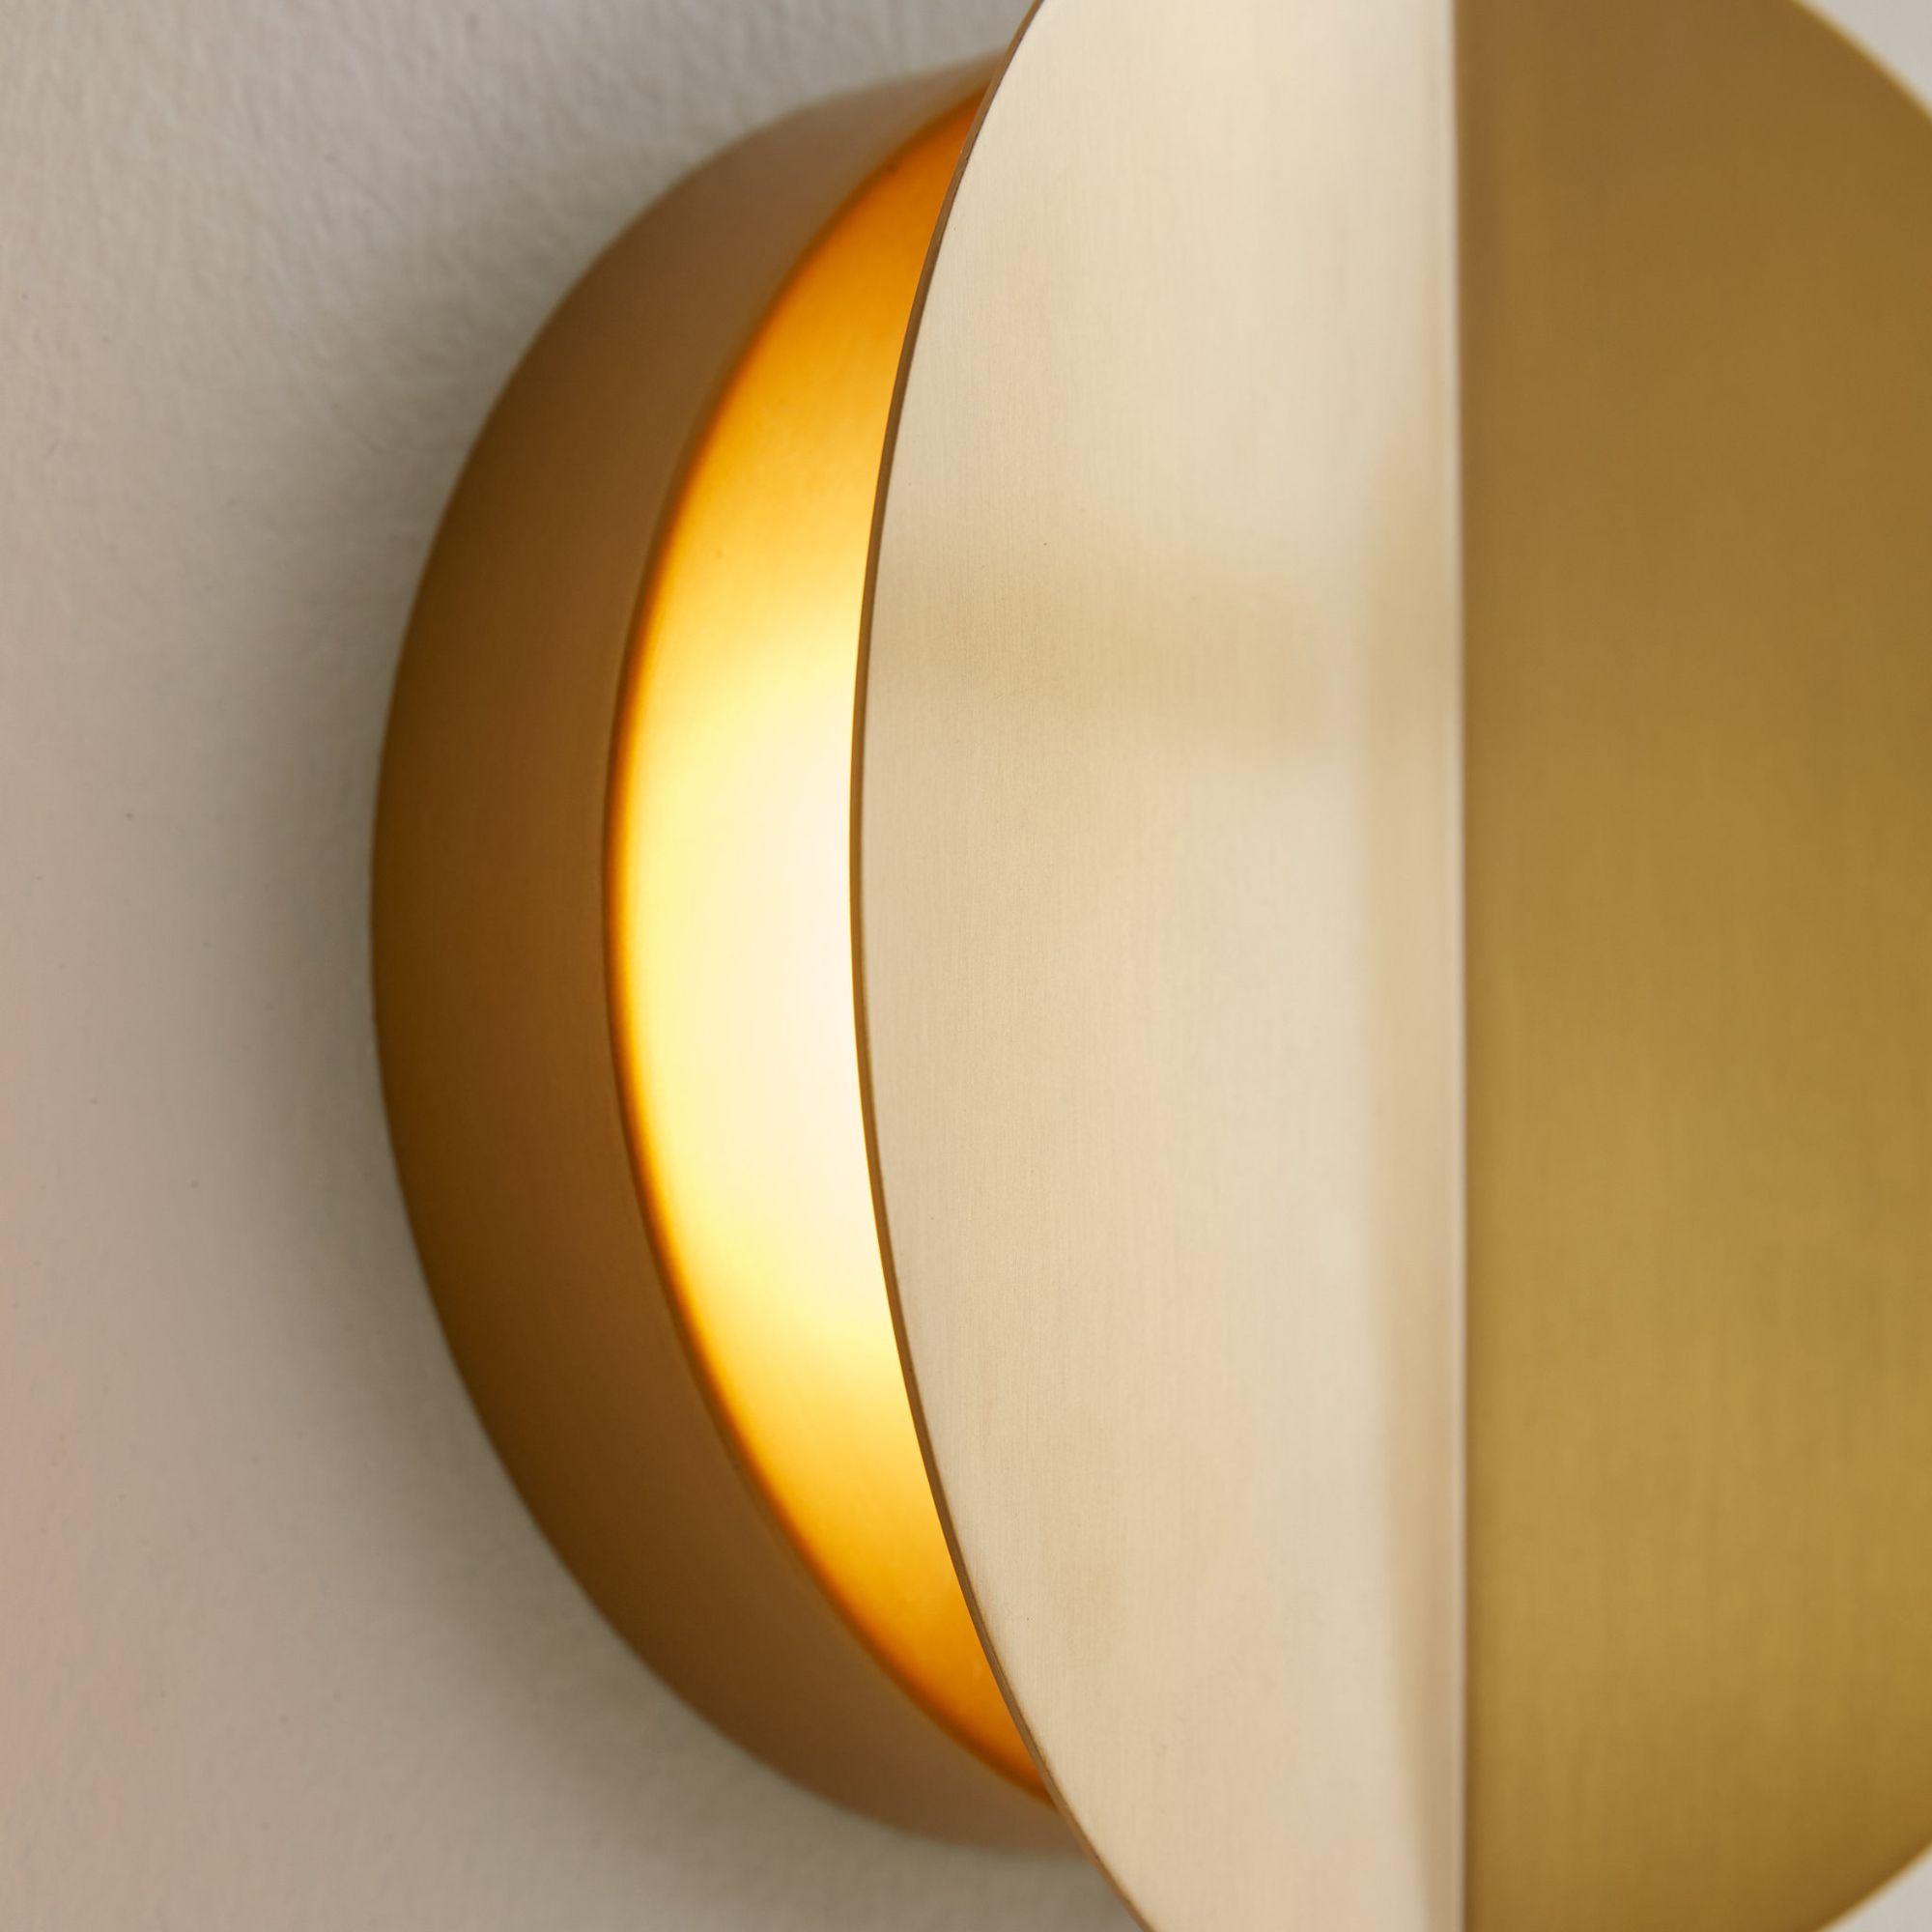 kate spade new york Dottie Small Sconce in Burnished Brass